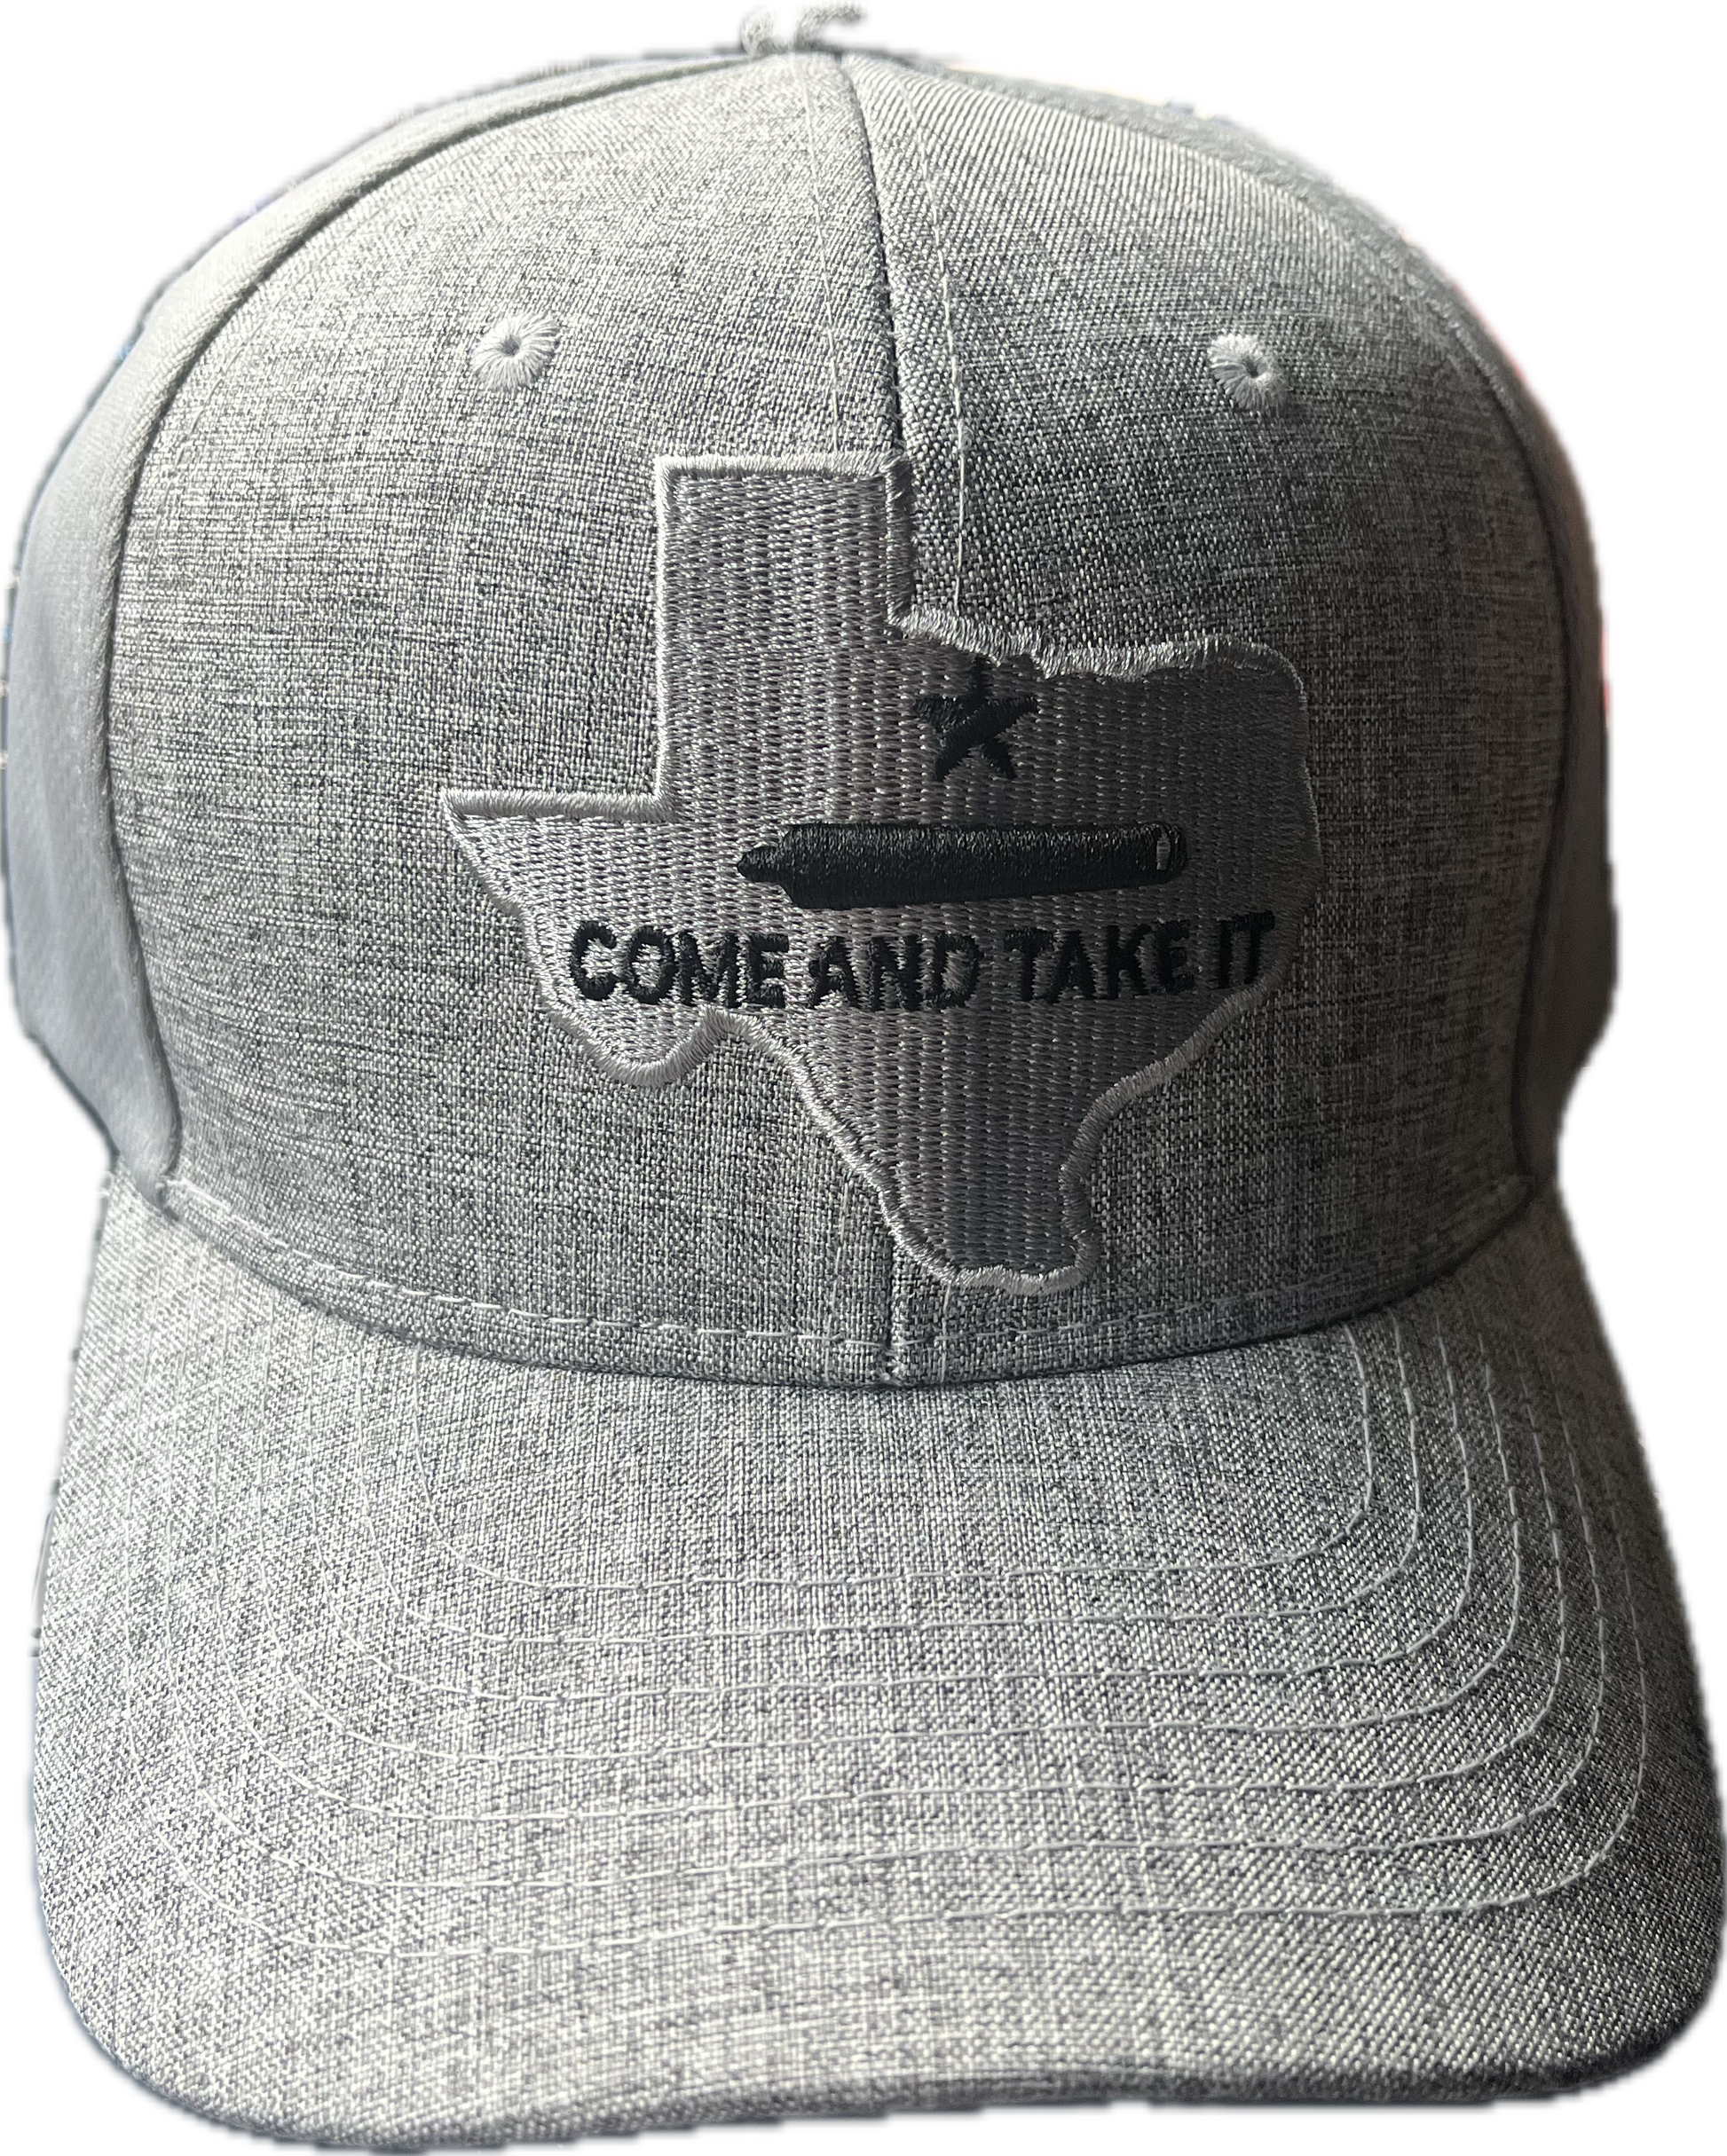 Come and Take It Cap - Texas Independence - High Quality Snapback Hat, Silver